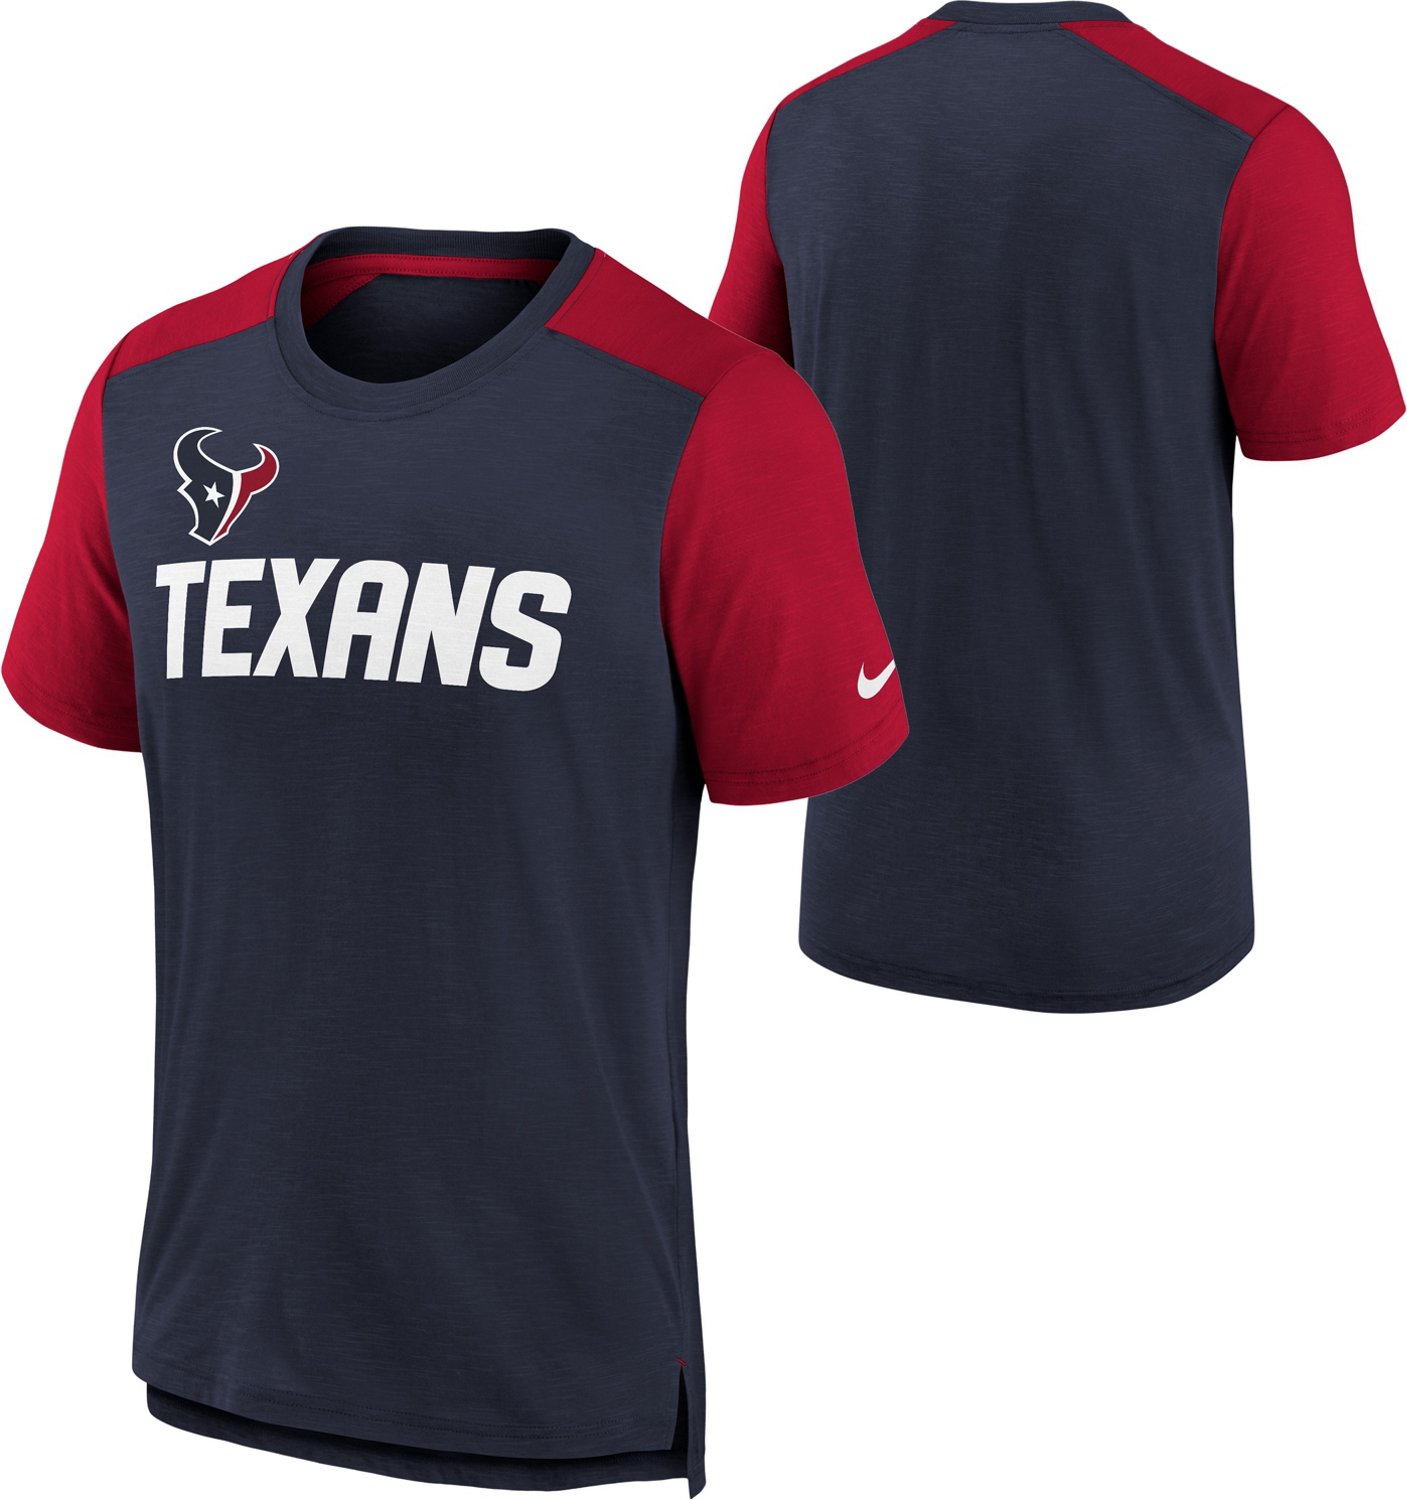 Nike Youth Houston Texans Colorblock Graphic T-shirt